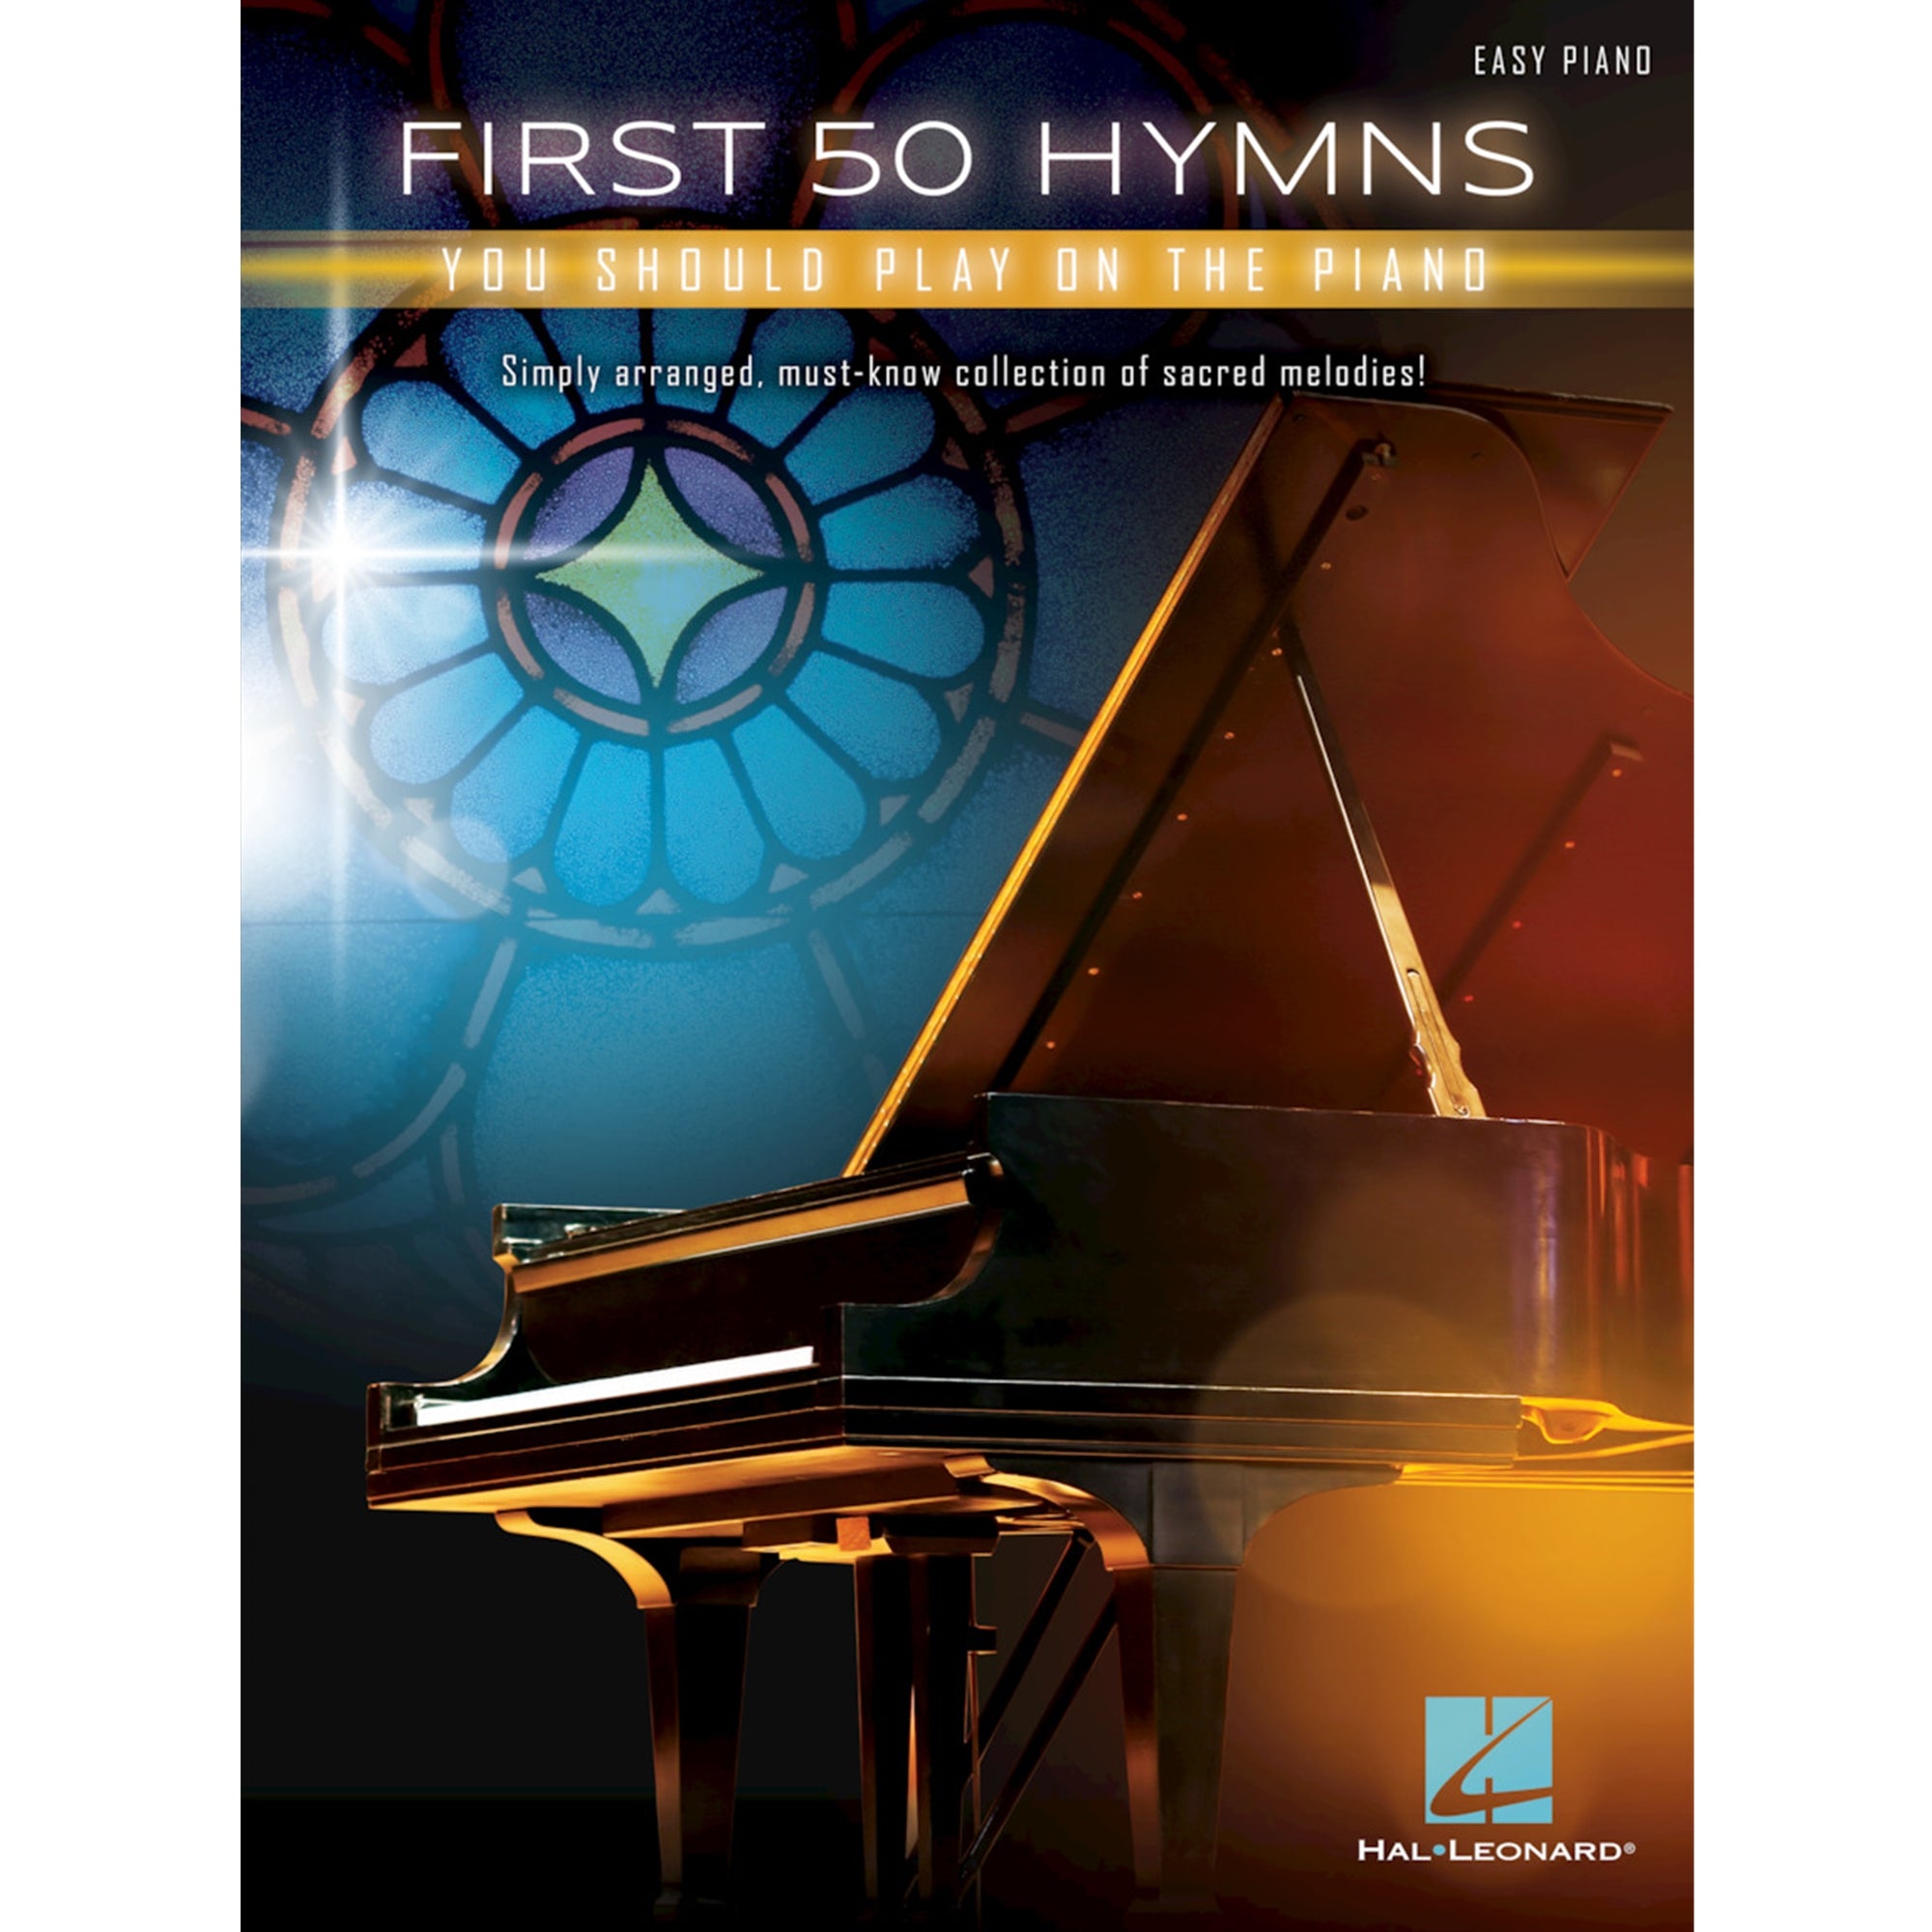 HAL LEONARD 275199 First 50 Hymns You Should Play on Piano